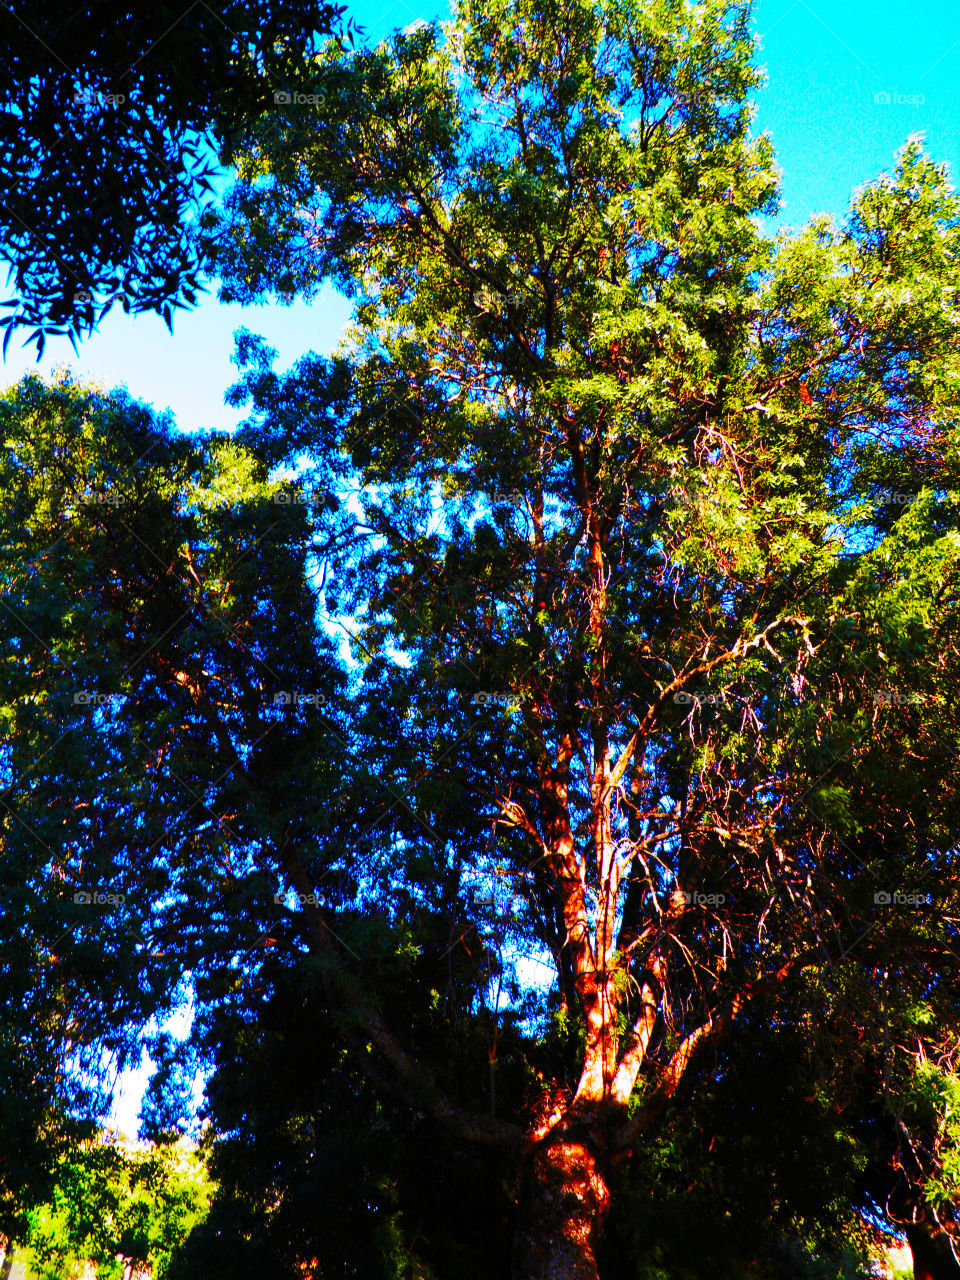 Colorful tree from a Madrid forest illuminated by a hot sun with a blue sky background in summer.